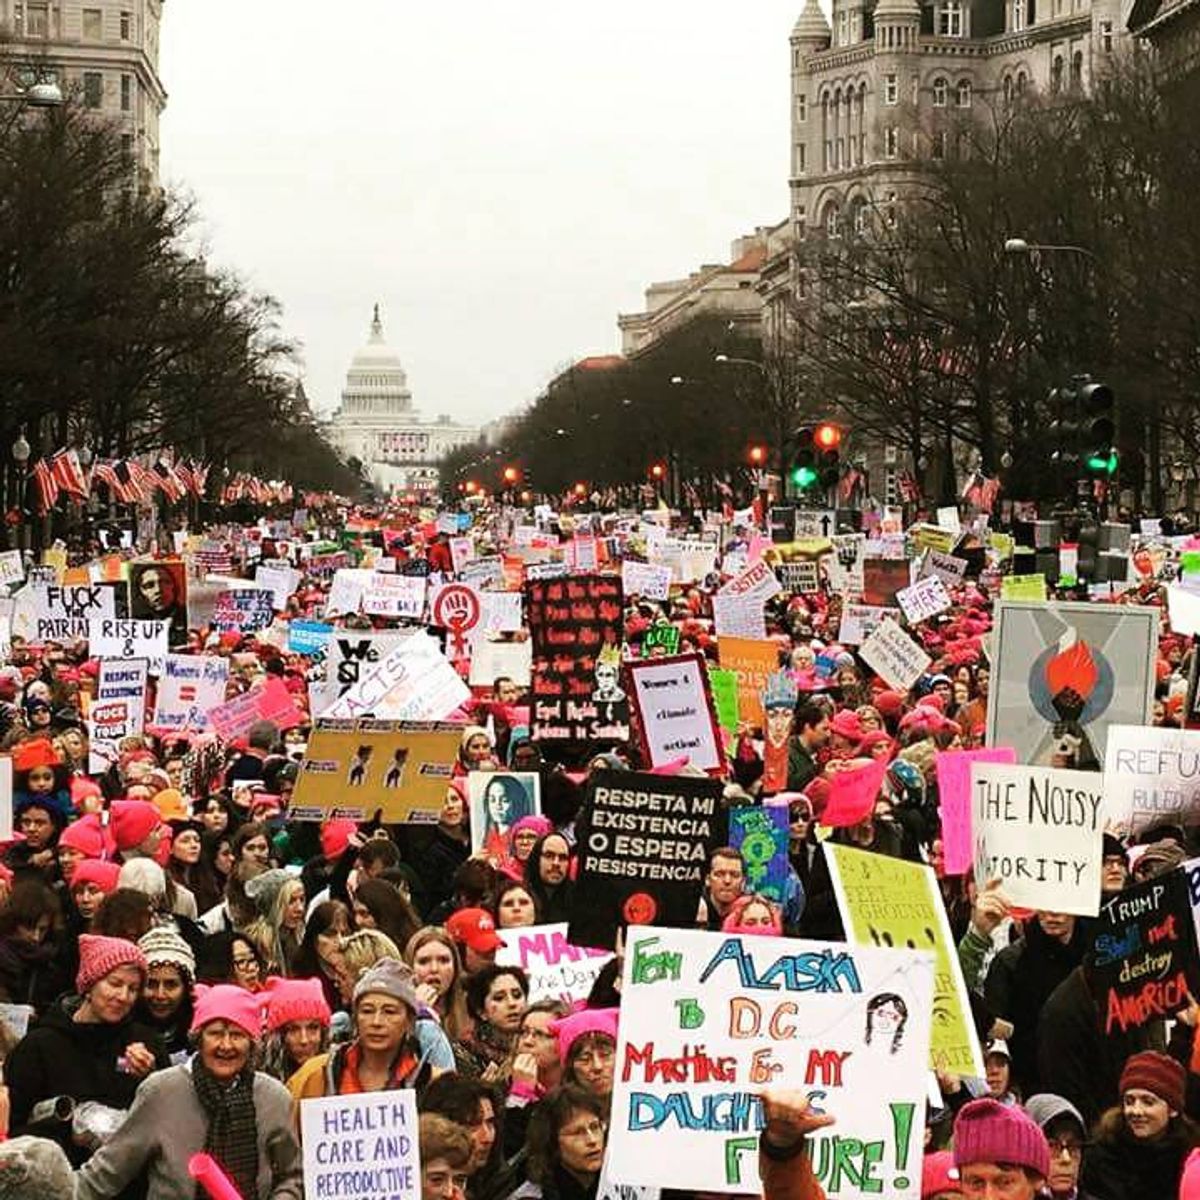 #WhyIMarched